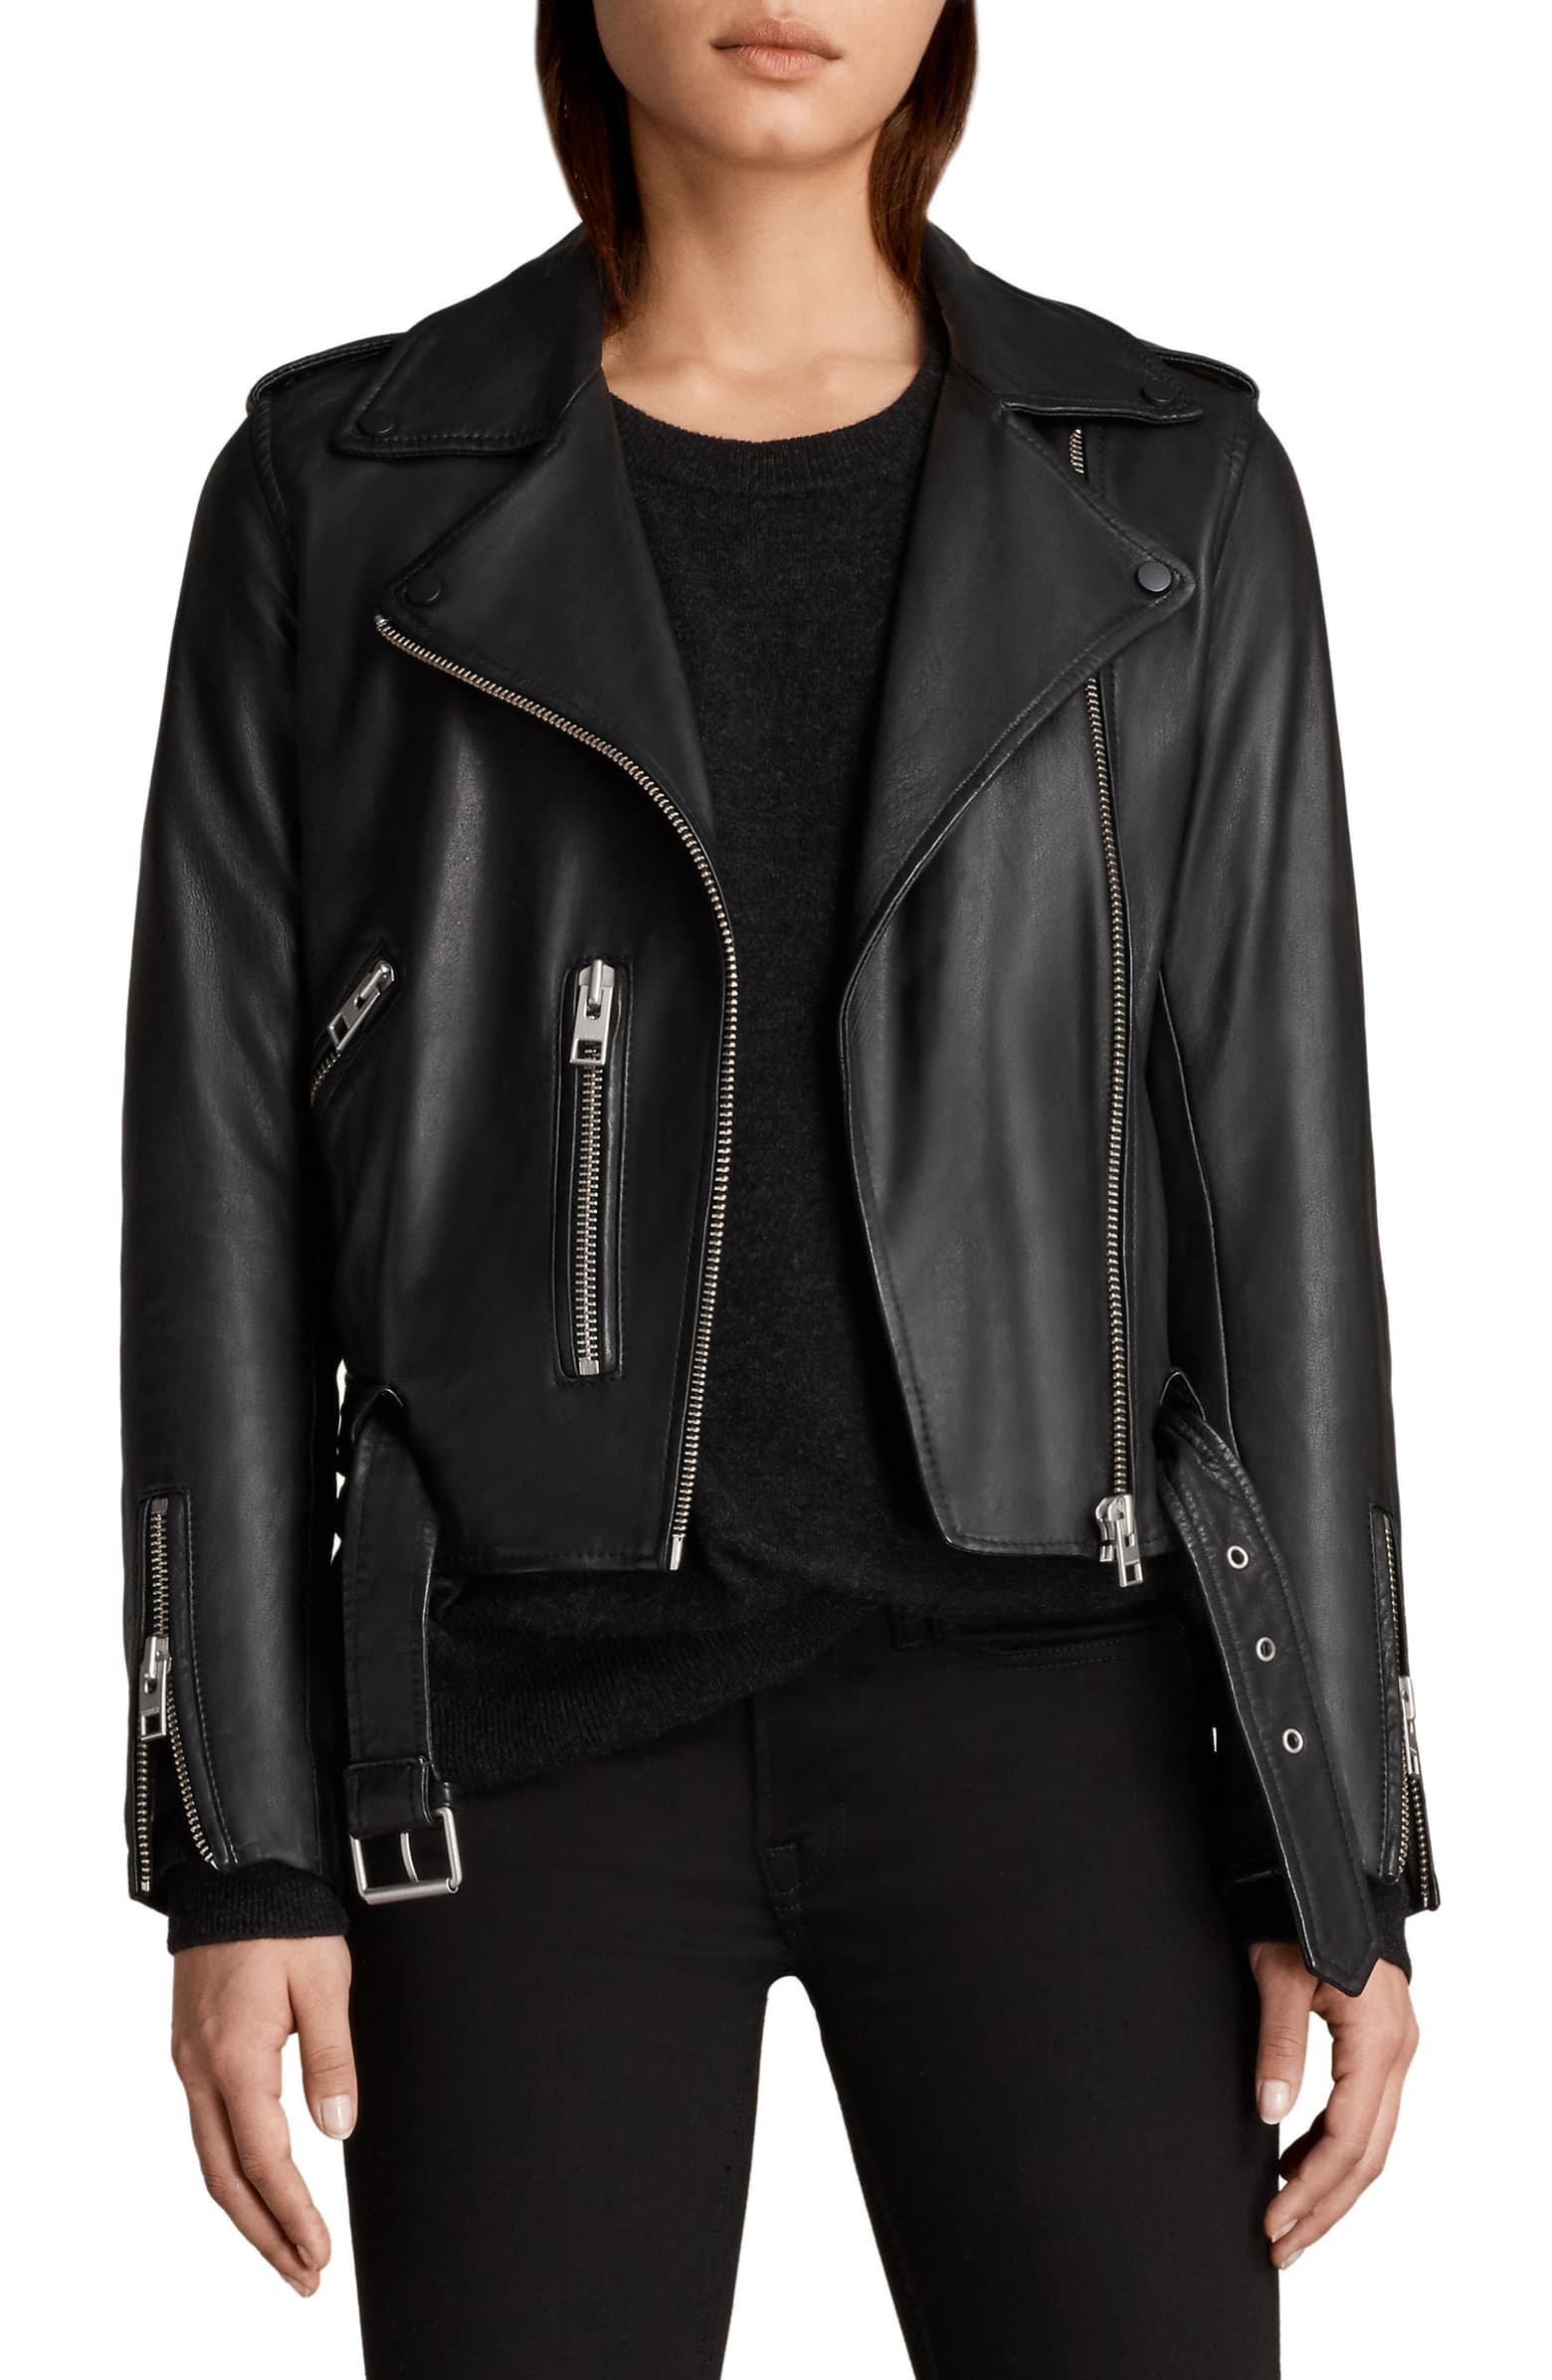 Your Guide To The Perfect Leather Jacket For Fall